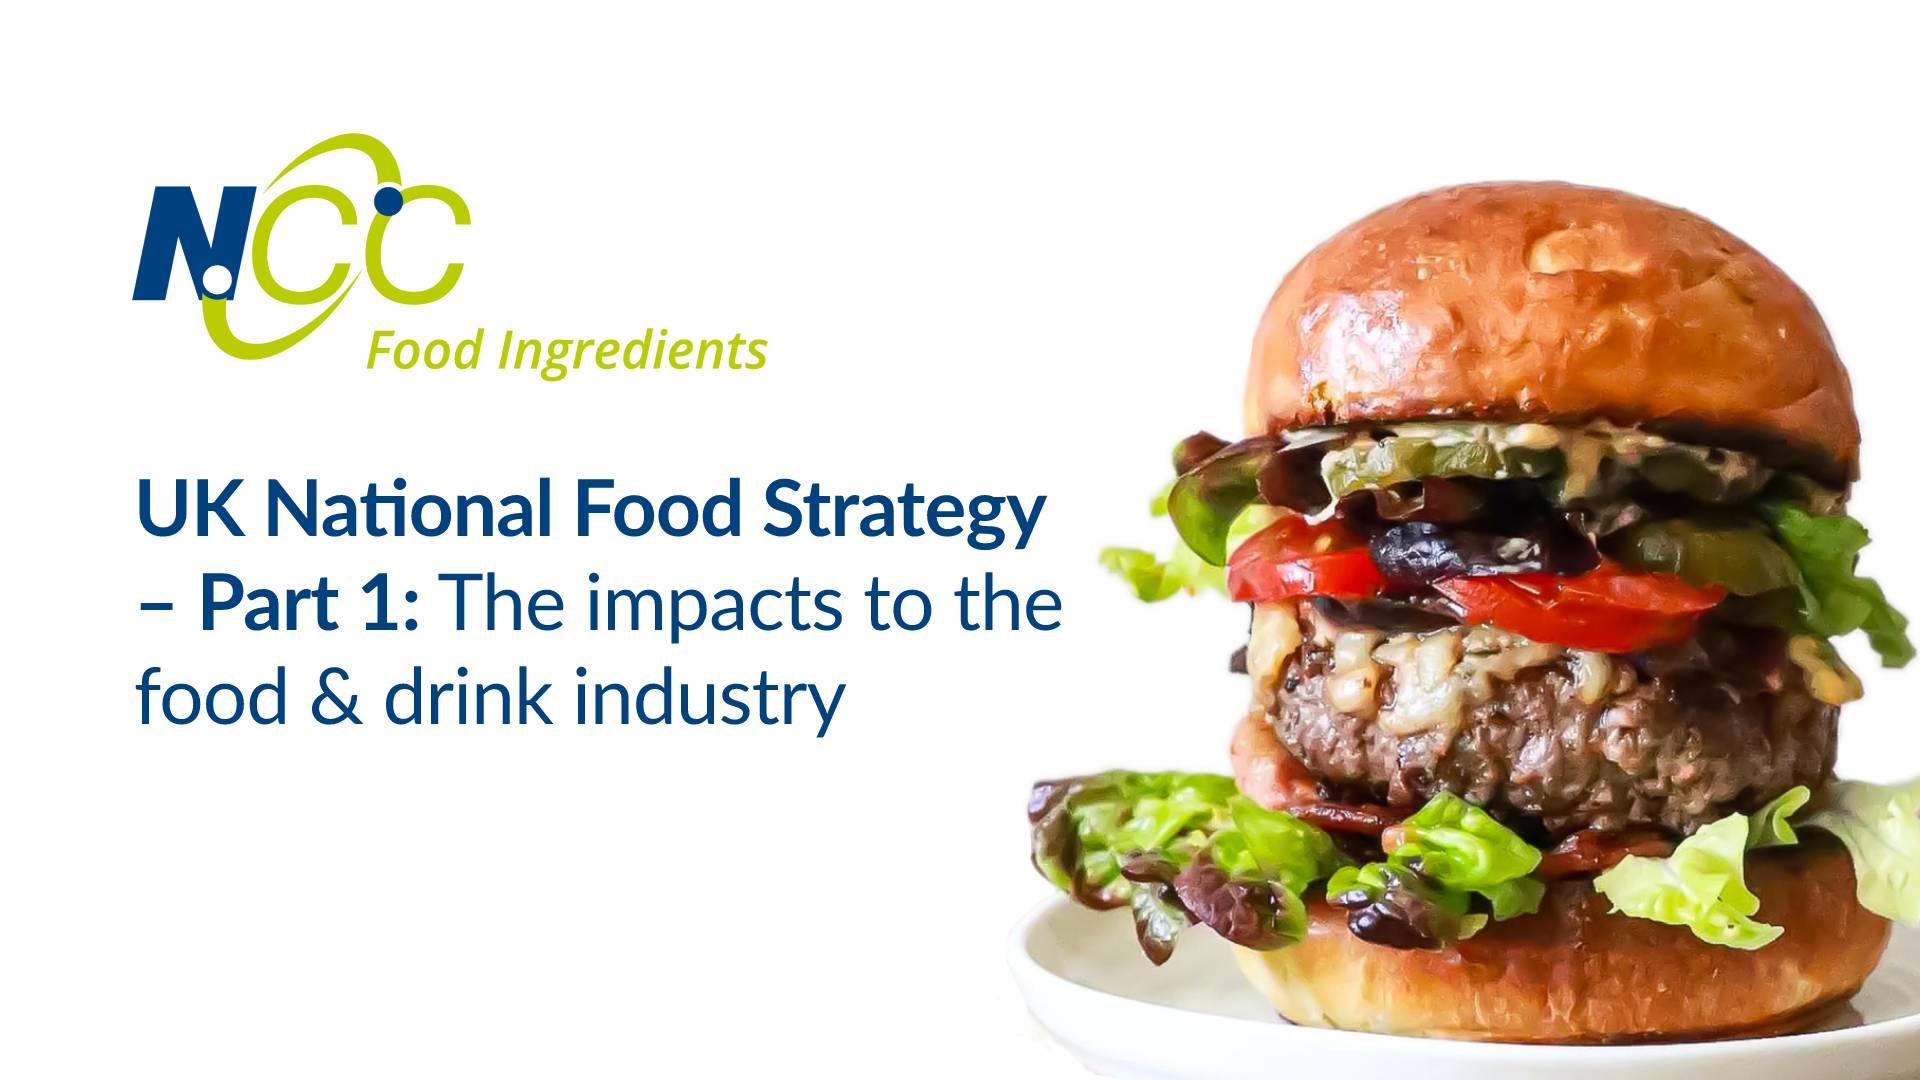 UK National Food Strategy – The impacts to the food & drink industry